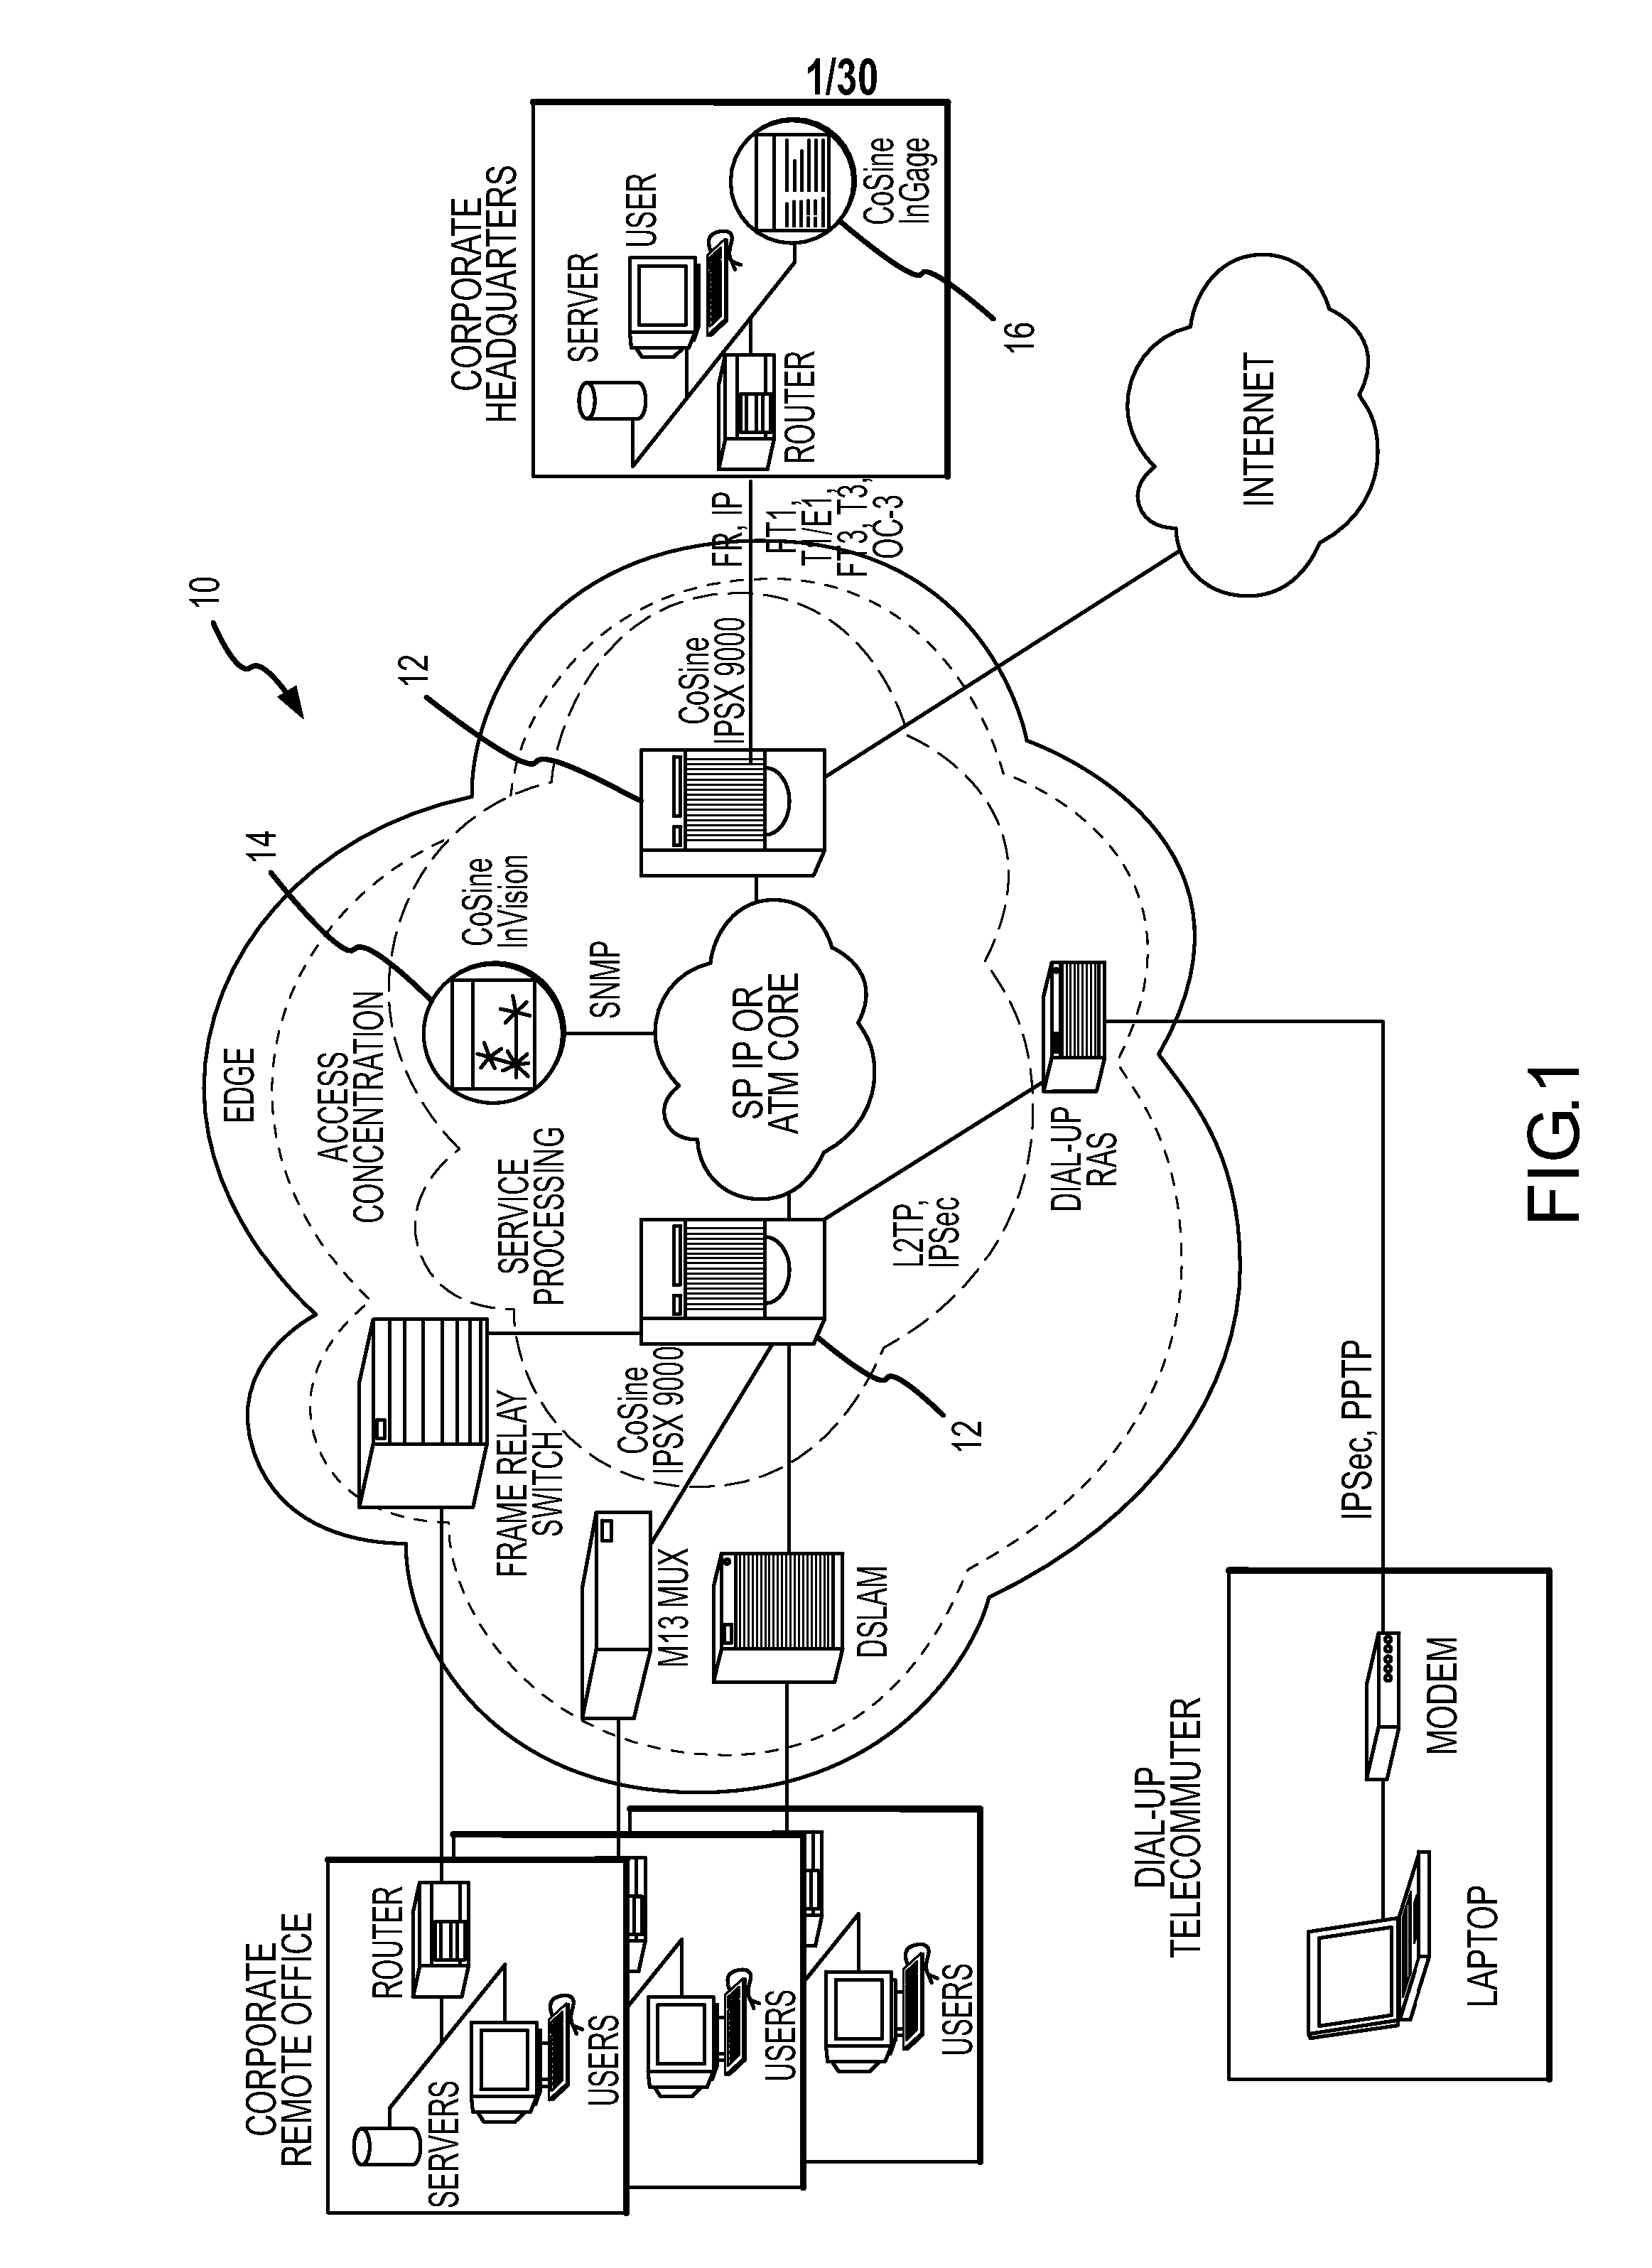 Switch management system and method